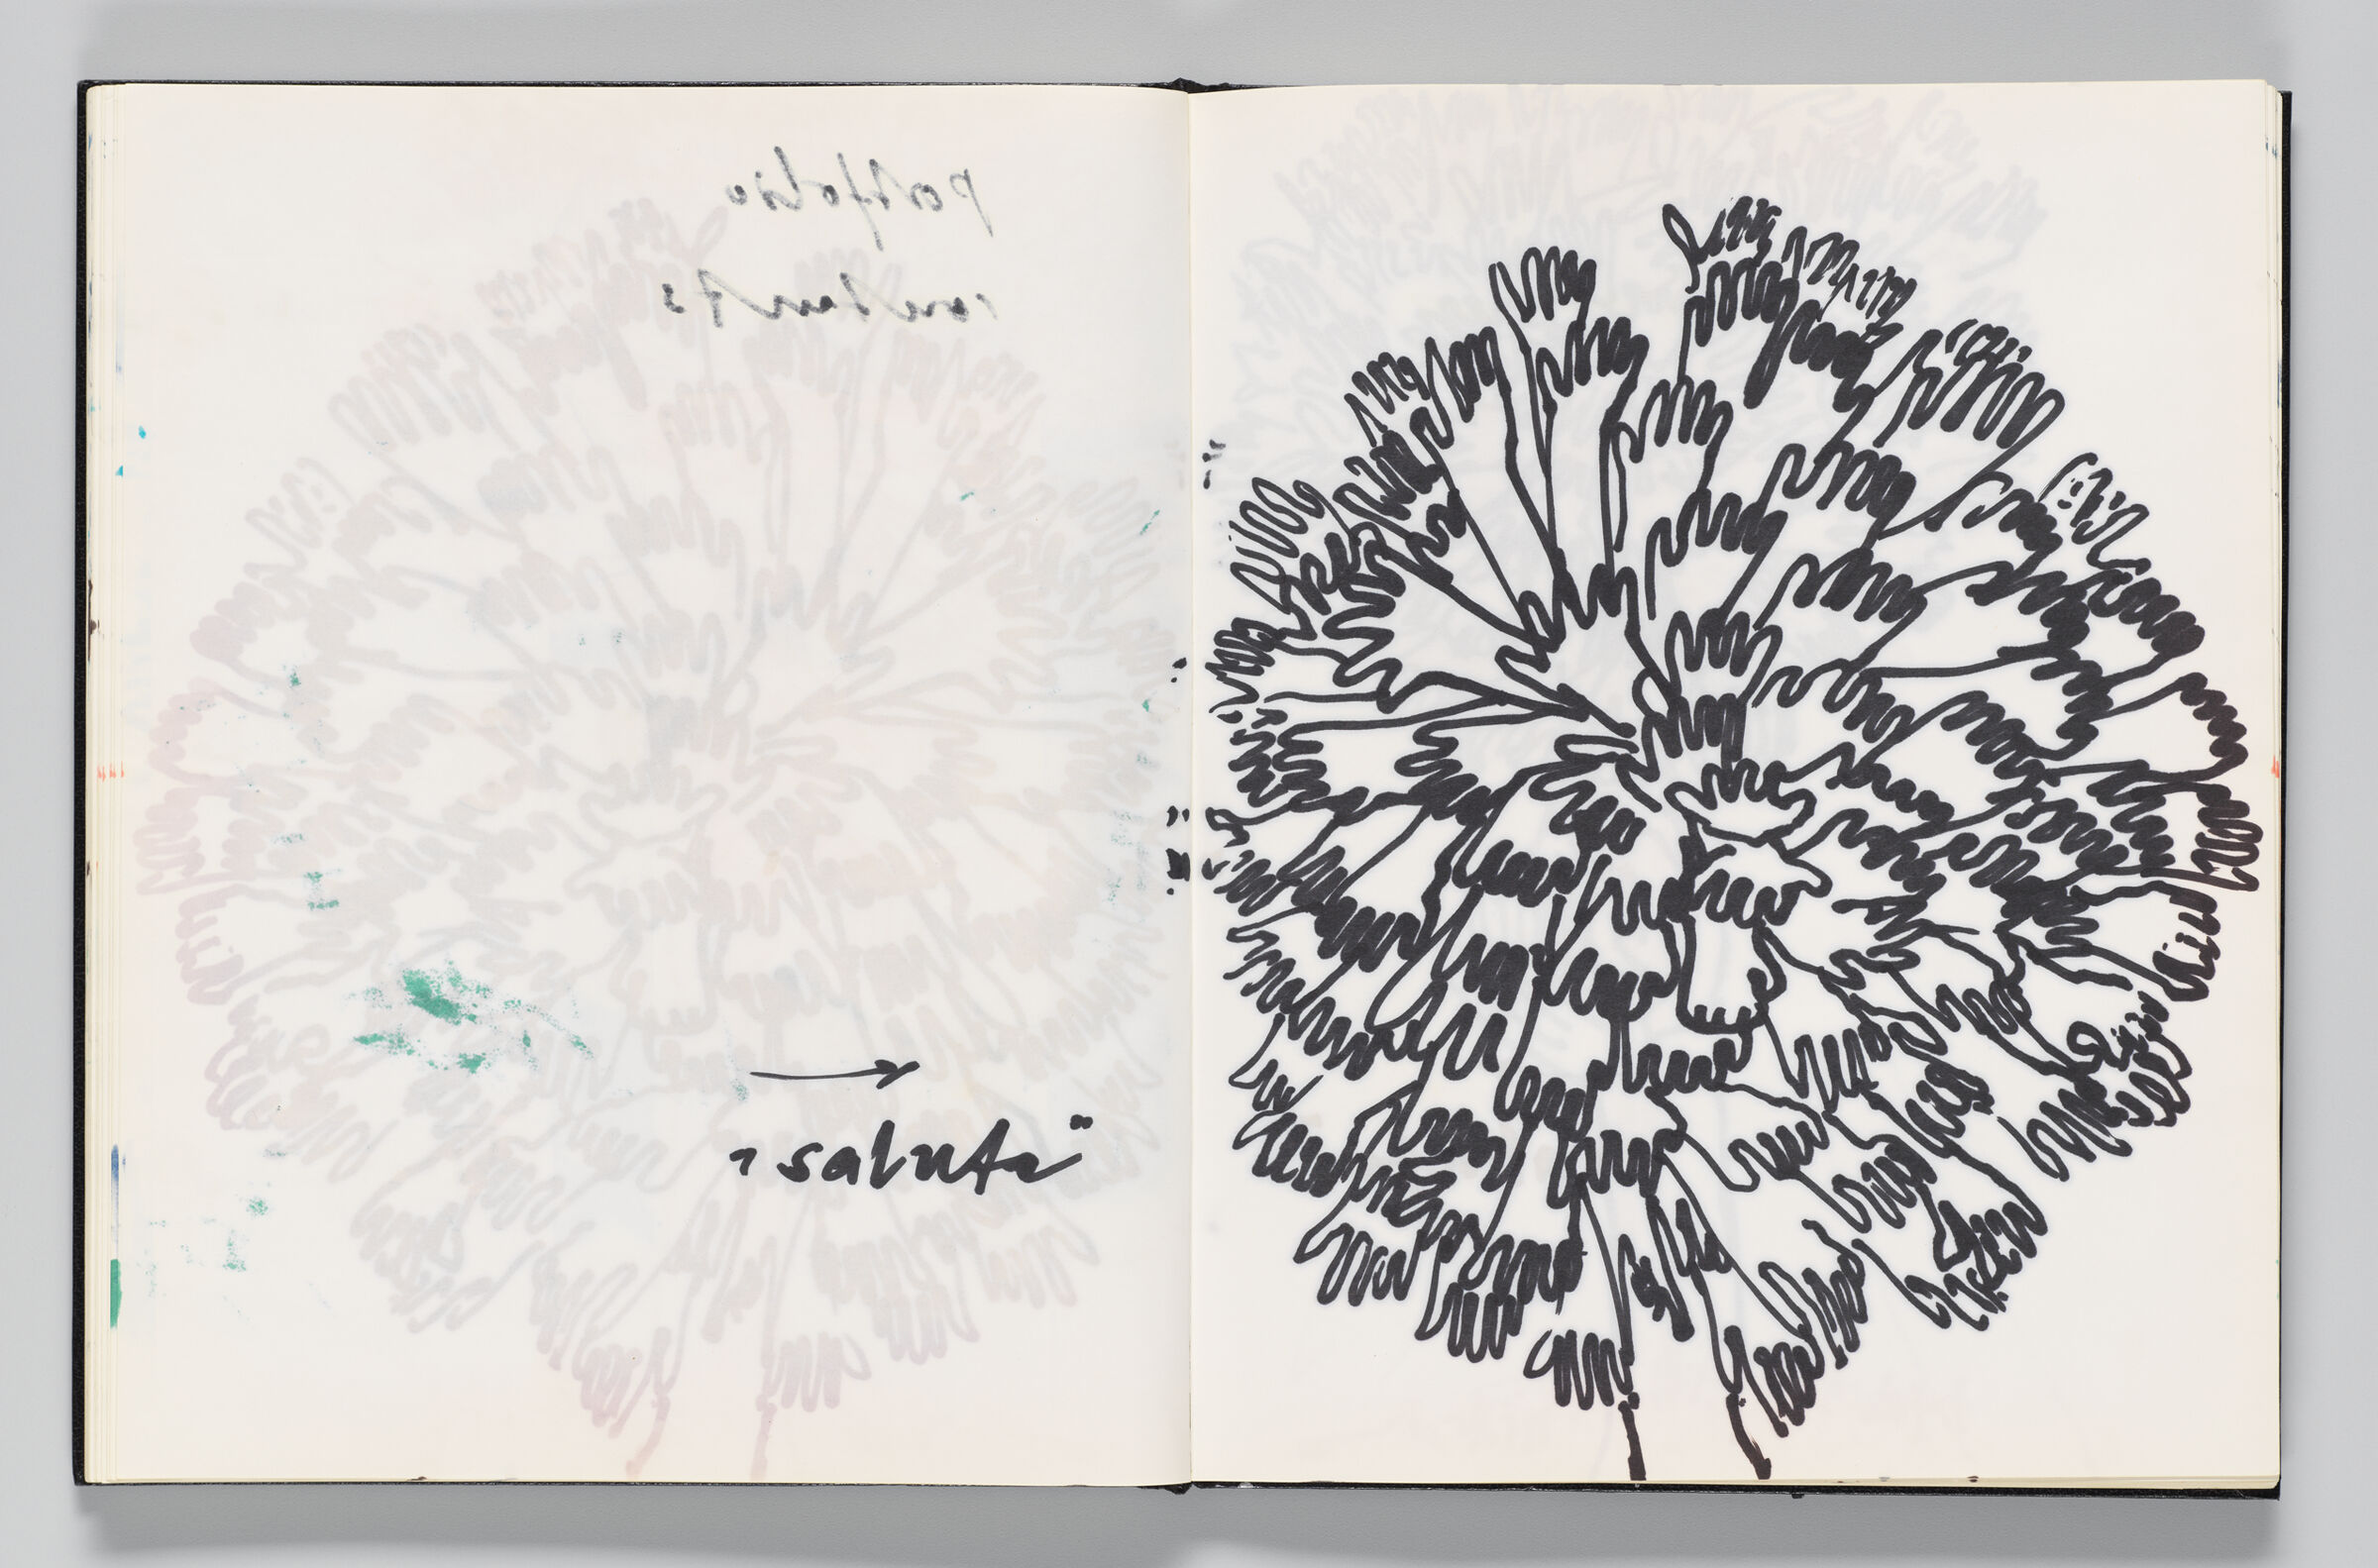 Untitled (Note And Bleed-Through Of Previous Page, Left Page); Untitled (